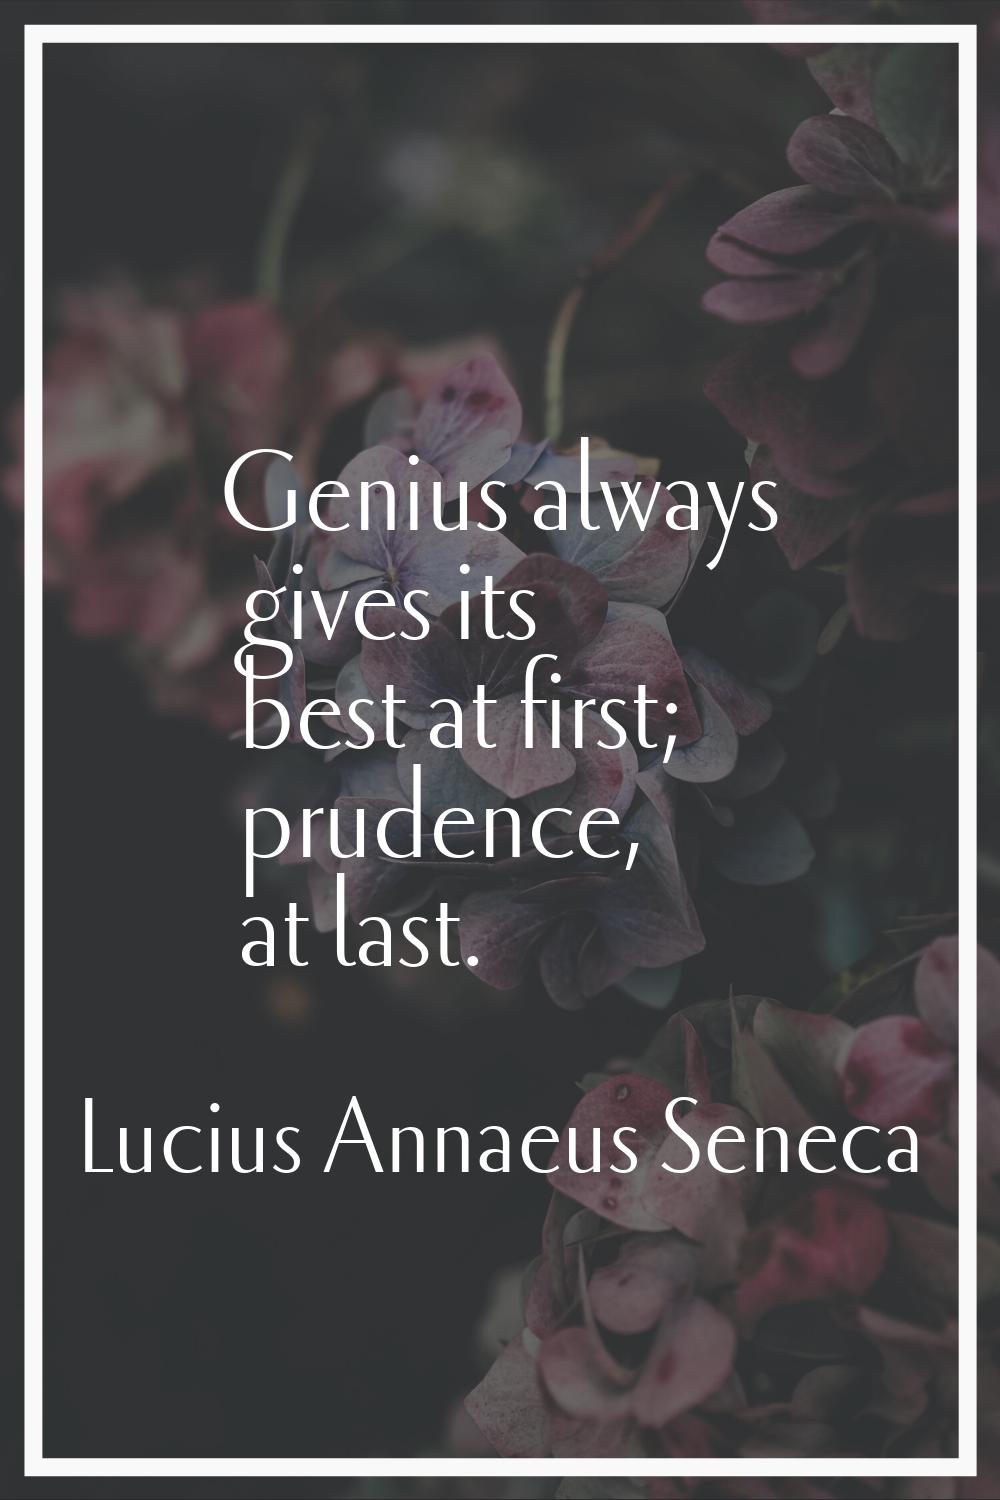 Genius always gives its best at first; prudence, at last.